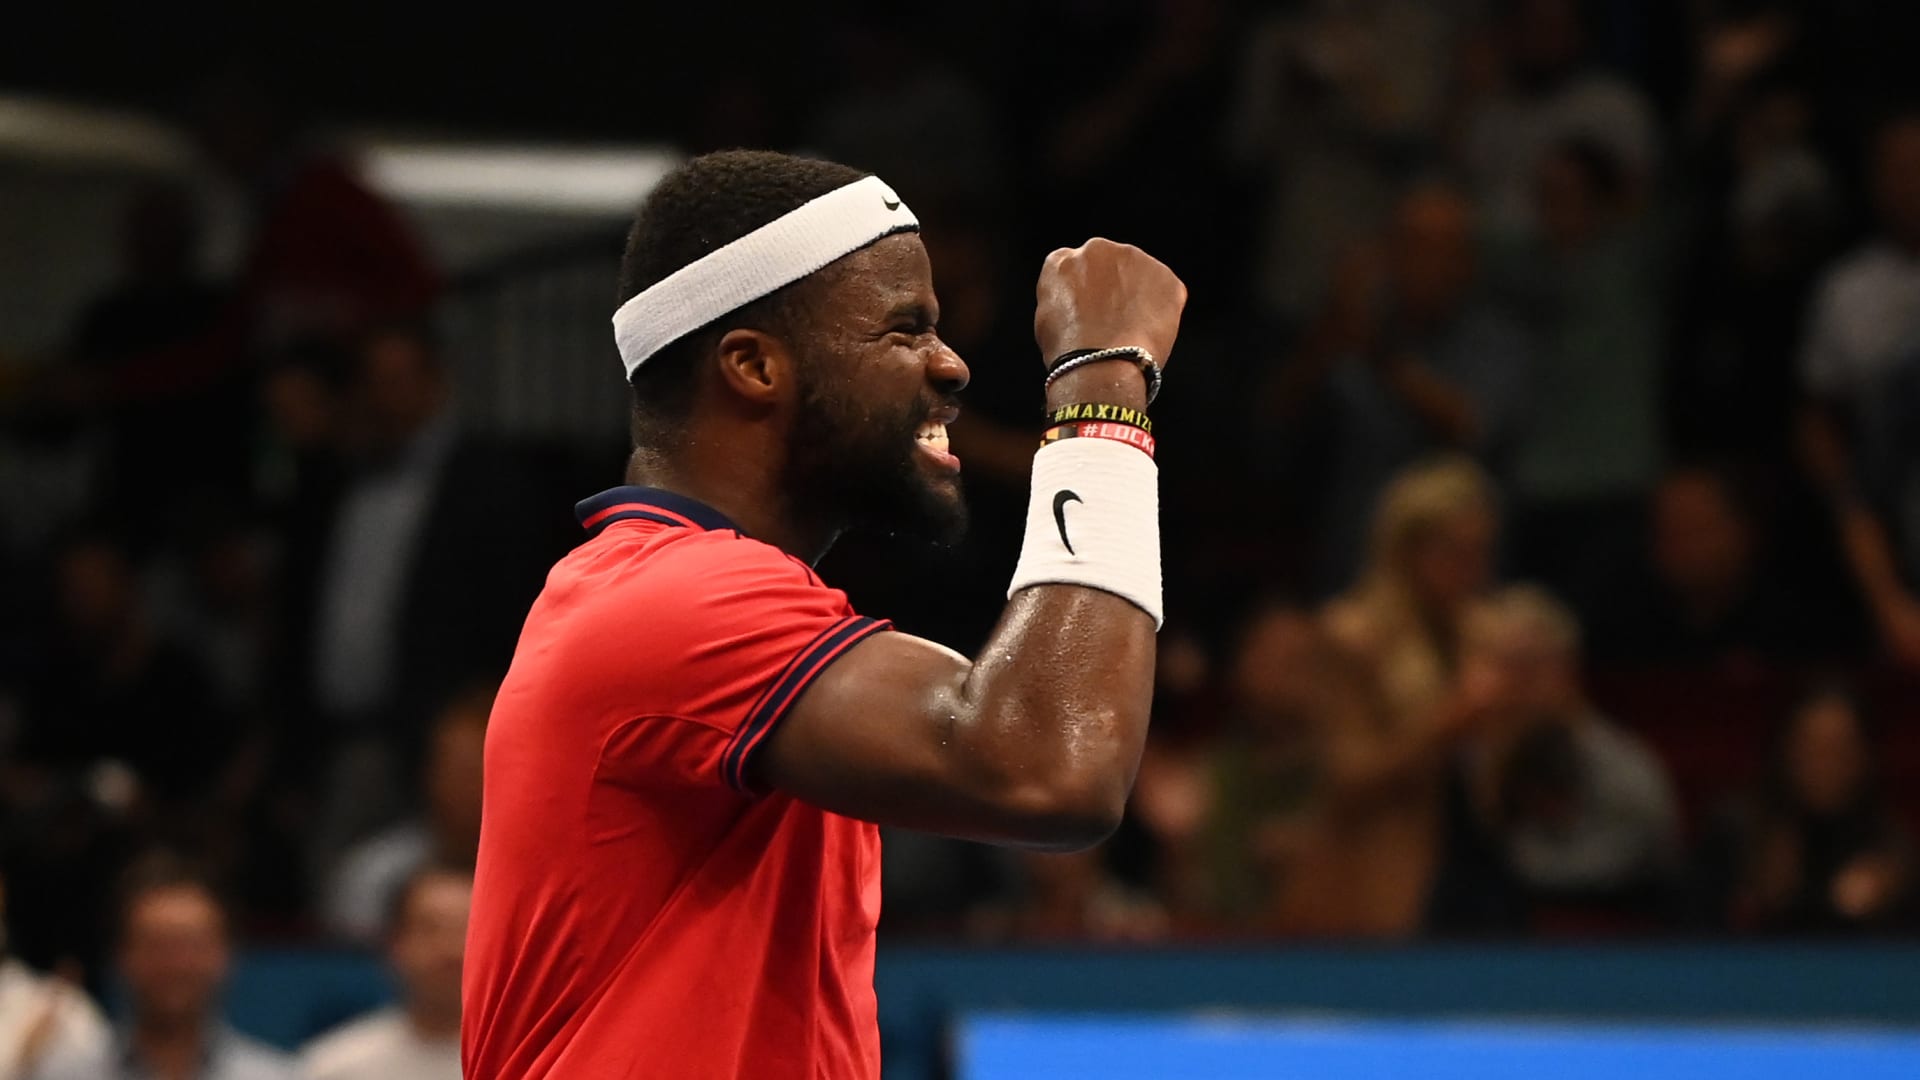 Unstoppable Zverev ends Tiafoe's run in Vienna for fifth title of 2021 -  Tennis Majors